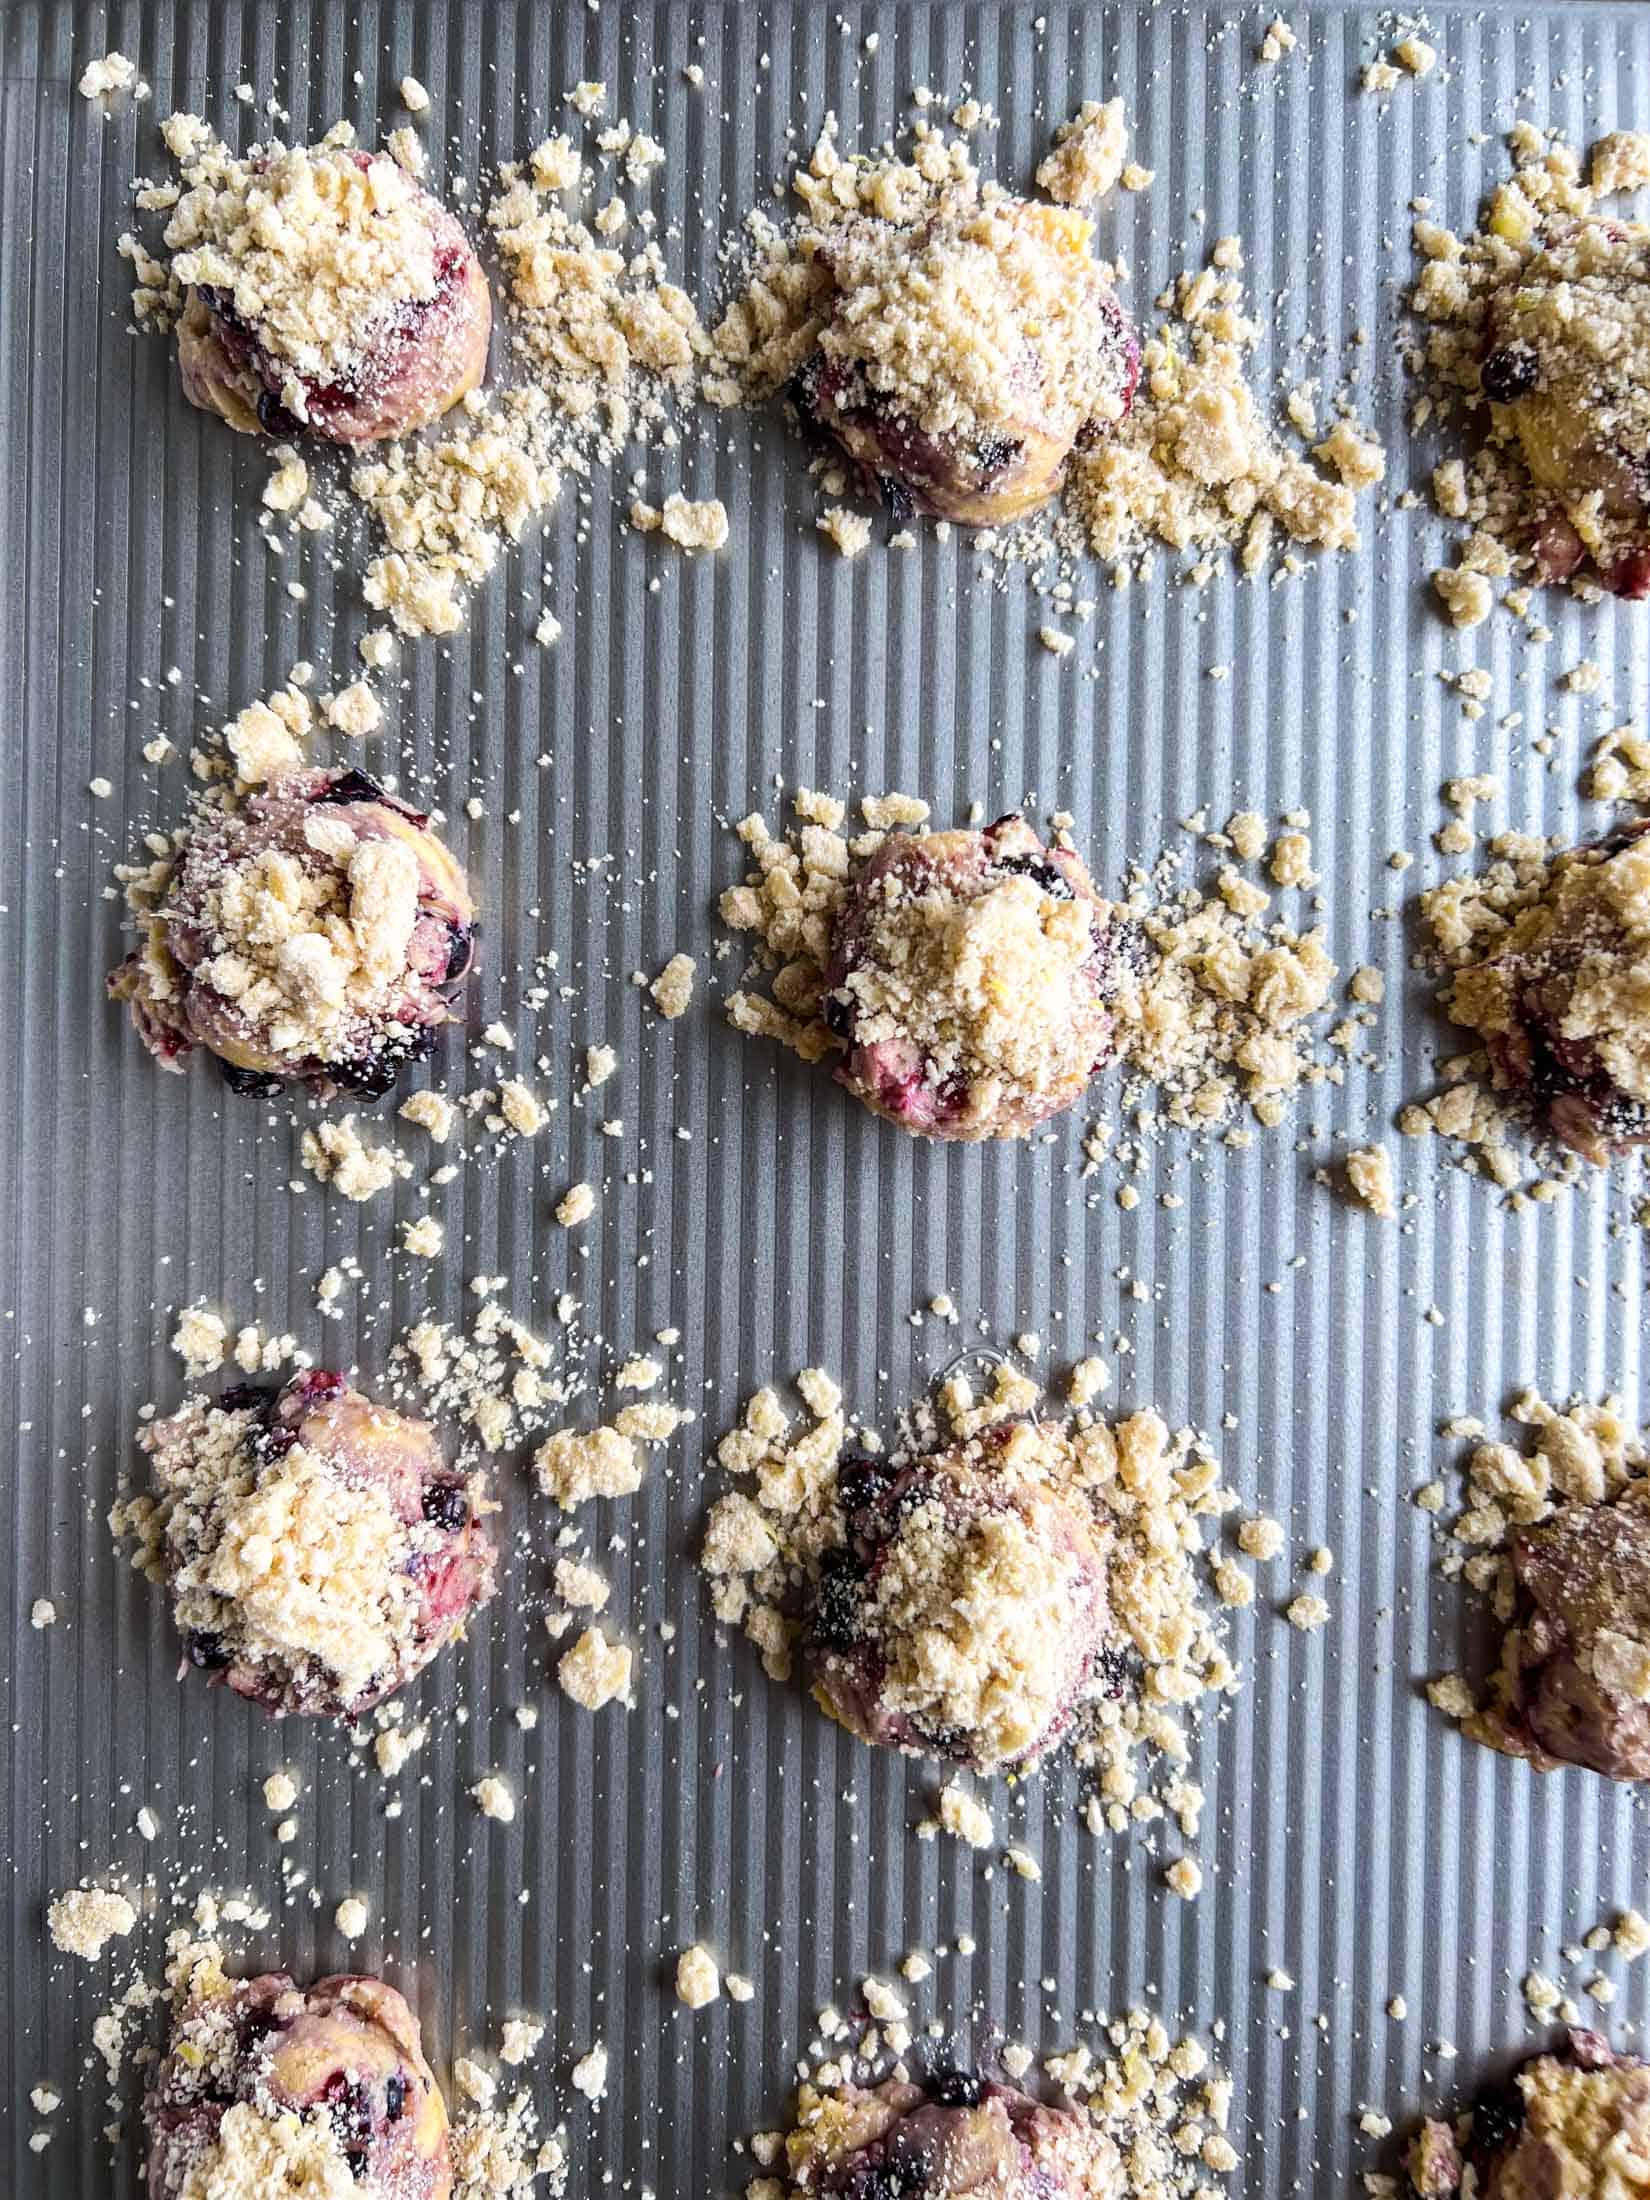 Uncooked lemon blueberry cookies dropped on a large baking sheet with crumble topping.